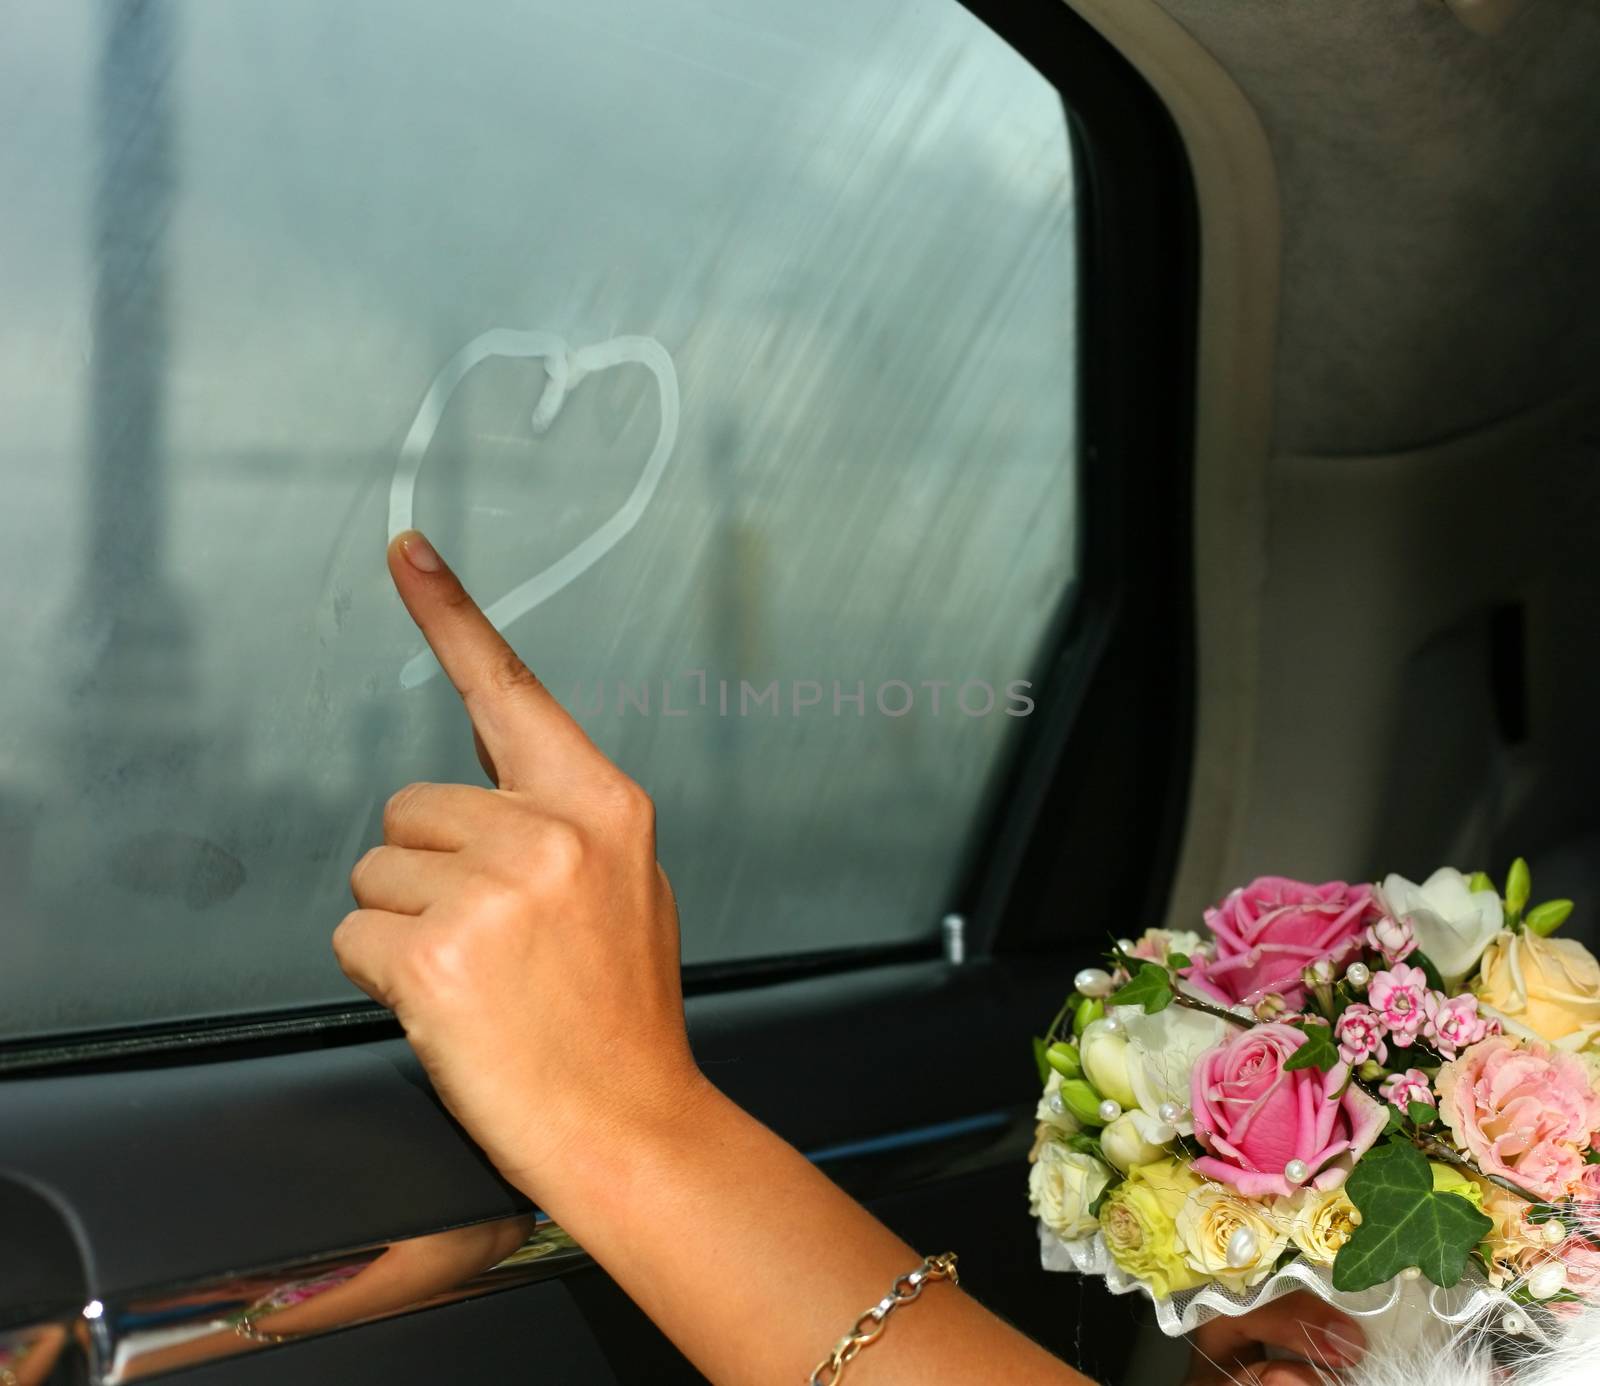 The bride draws heart at a window of the automobile